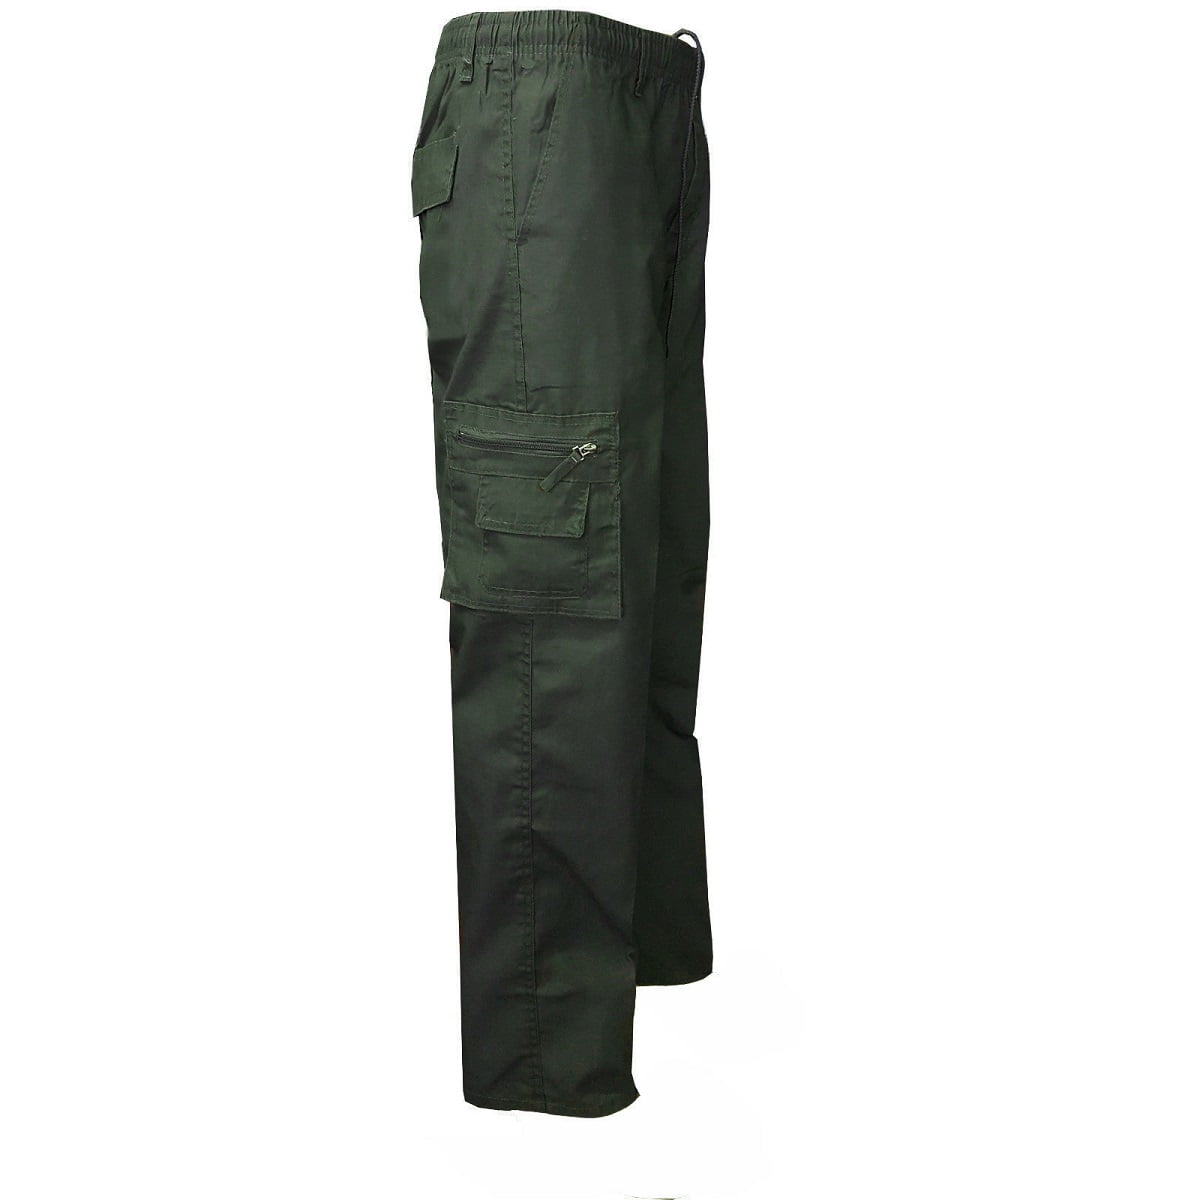 YUNY Men Drawstring Zip-up Pockets Collection Outdoor Cargo Pants 1 L